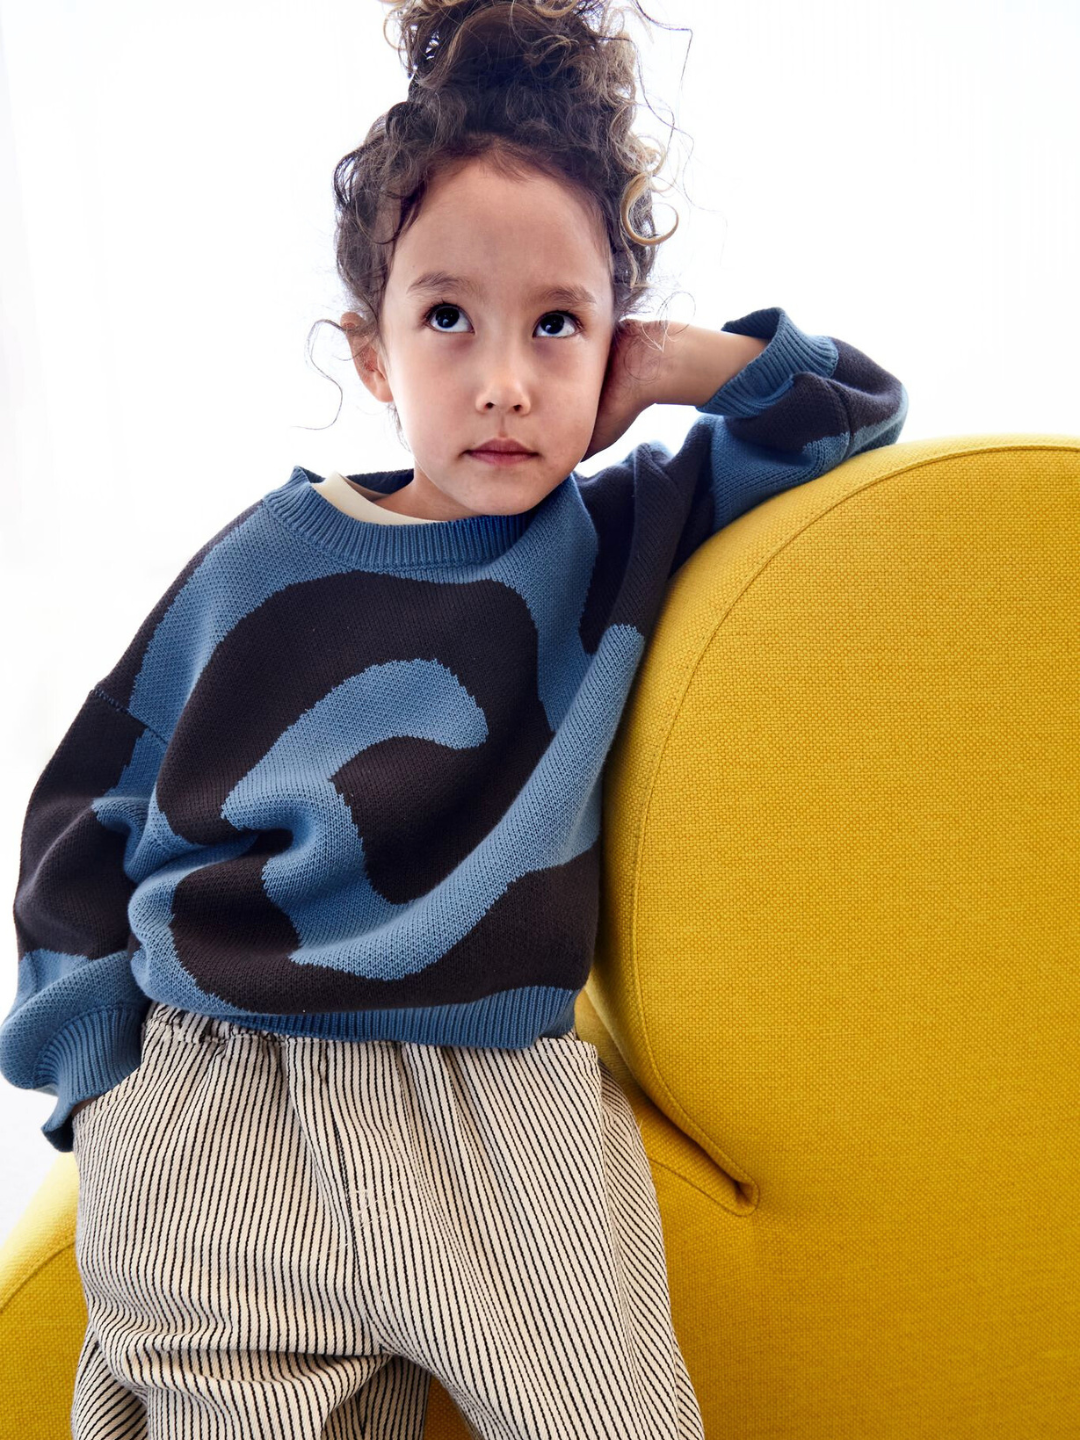 A child wearing a kids crewneck sweater in medium blue, with a large single charcoal grey swirl design that covers the entire sweater. She is seated on a yellow chair and wearing white pants with a thin black stripe.